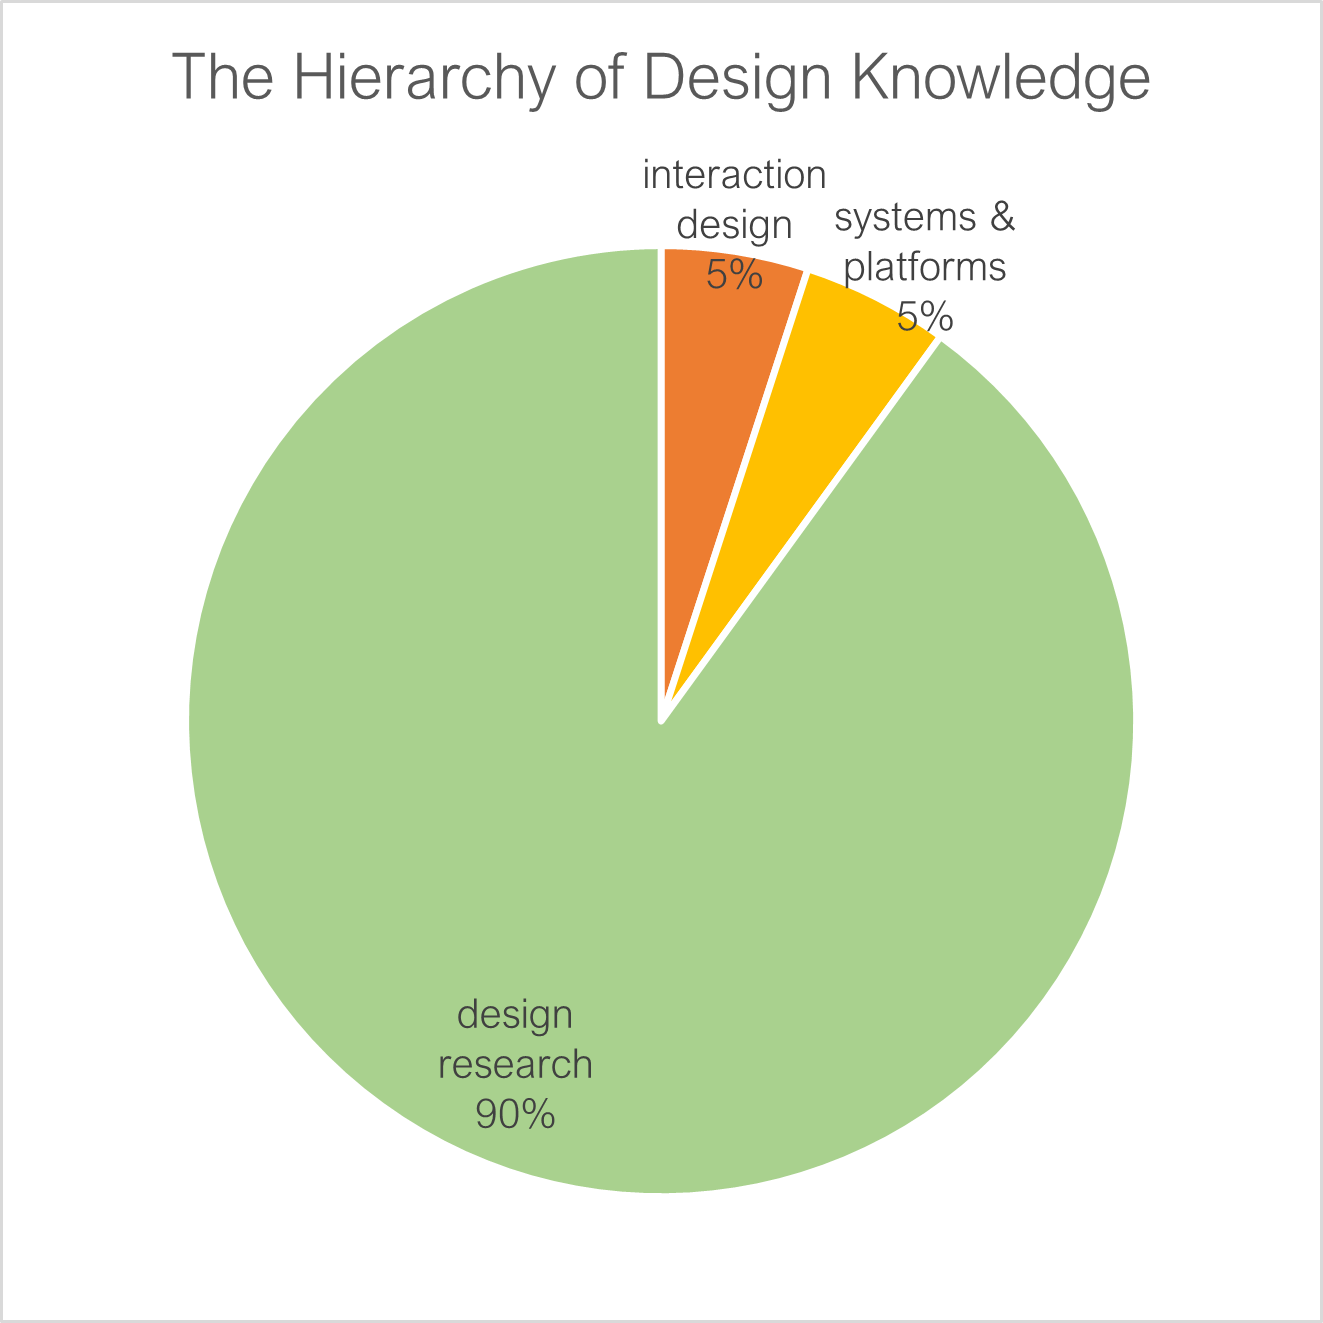 the hierarchy of design knowledge: activity proportions